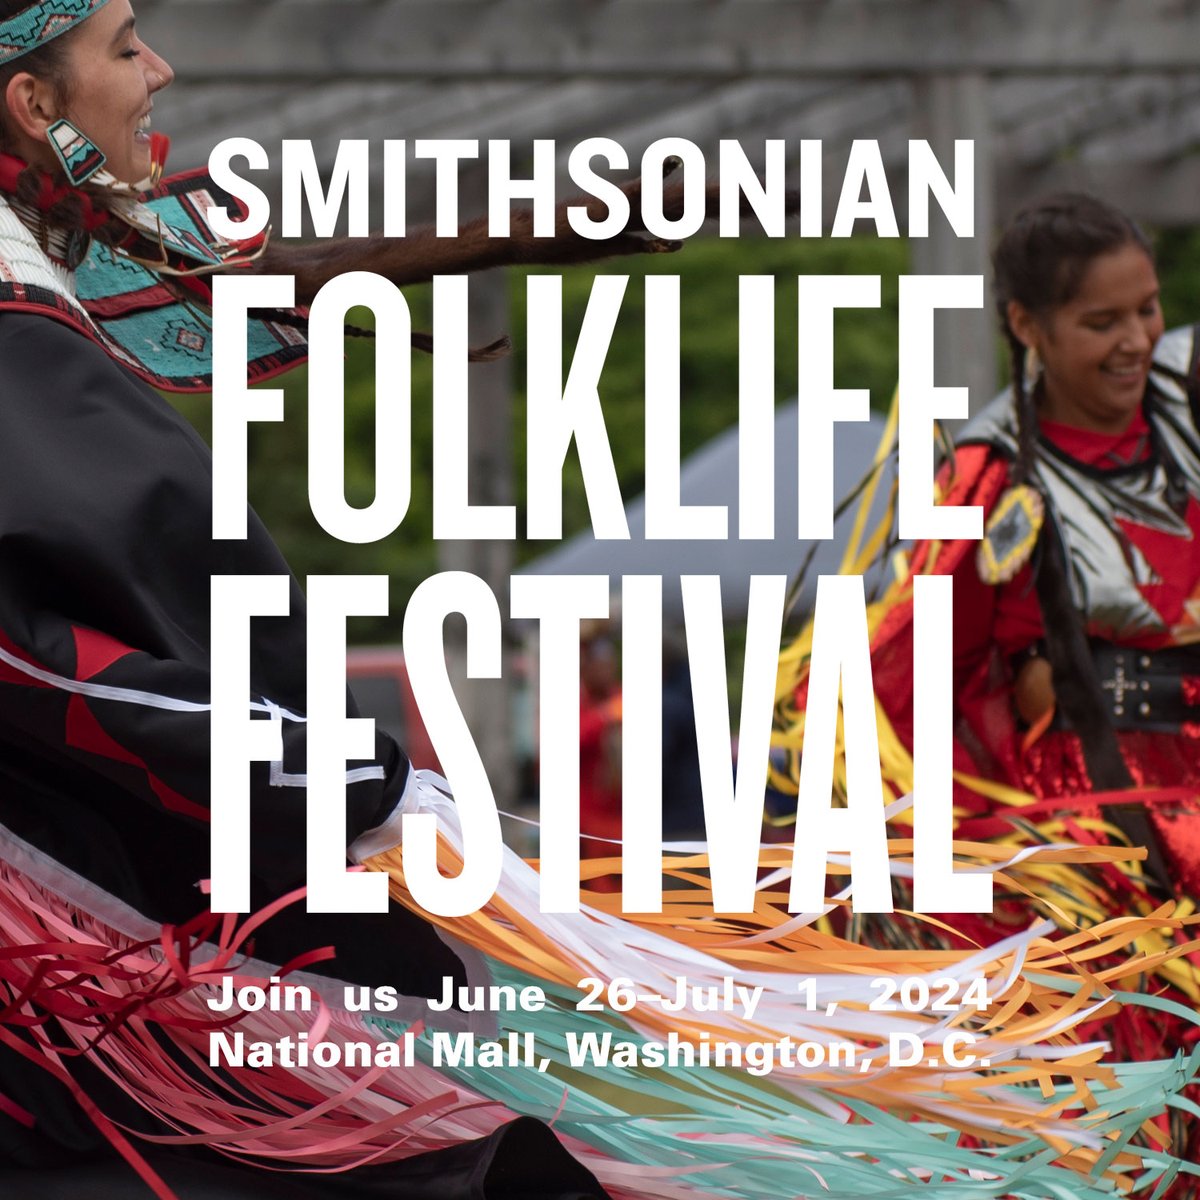 Countdown to the #2024 Folklife Festival: 50 days! Twenty years after the opening of @SmithsonianNMAI in Washington, D.C., we‘re welcoming back Indigenous elders and youth, experts and learners, artists and knowledge keepers. We can’t wait for you to meet them, June 26–July 1!